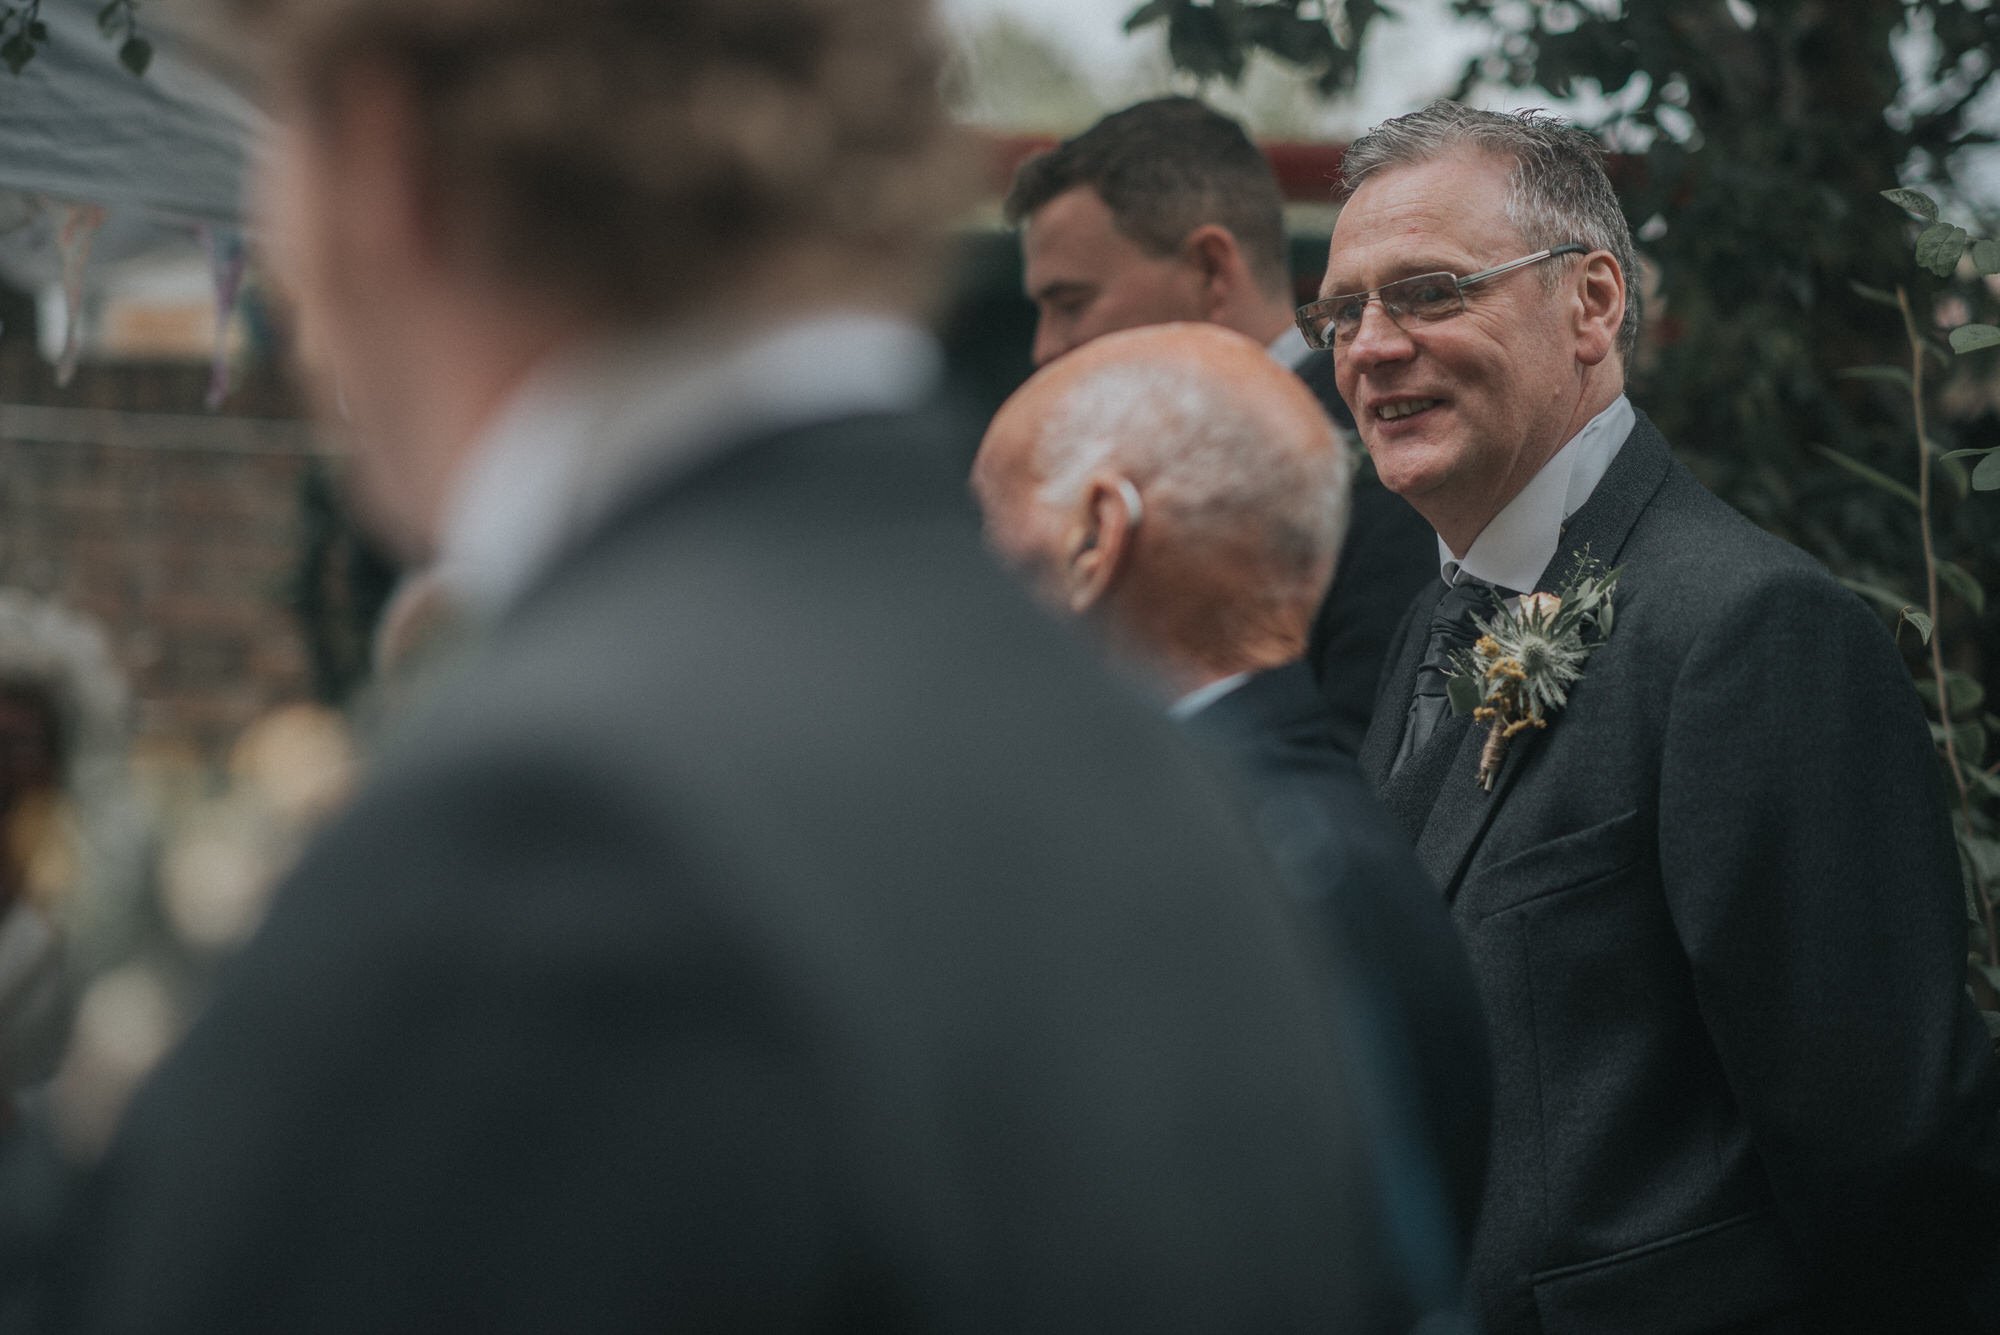 The Grooms Dad smiles and looks at the groom whilst he is giving a speech